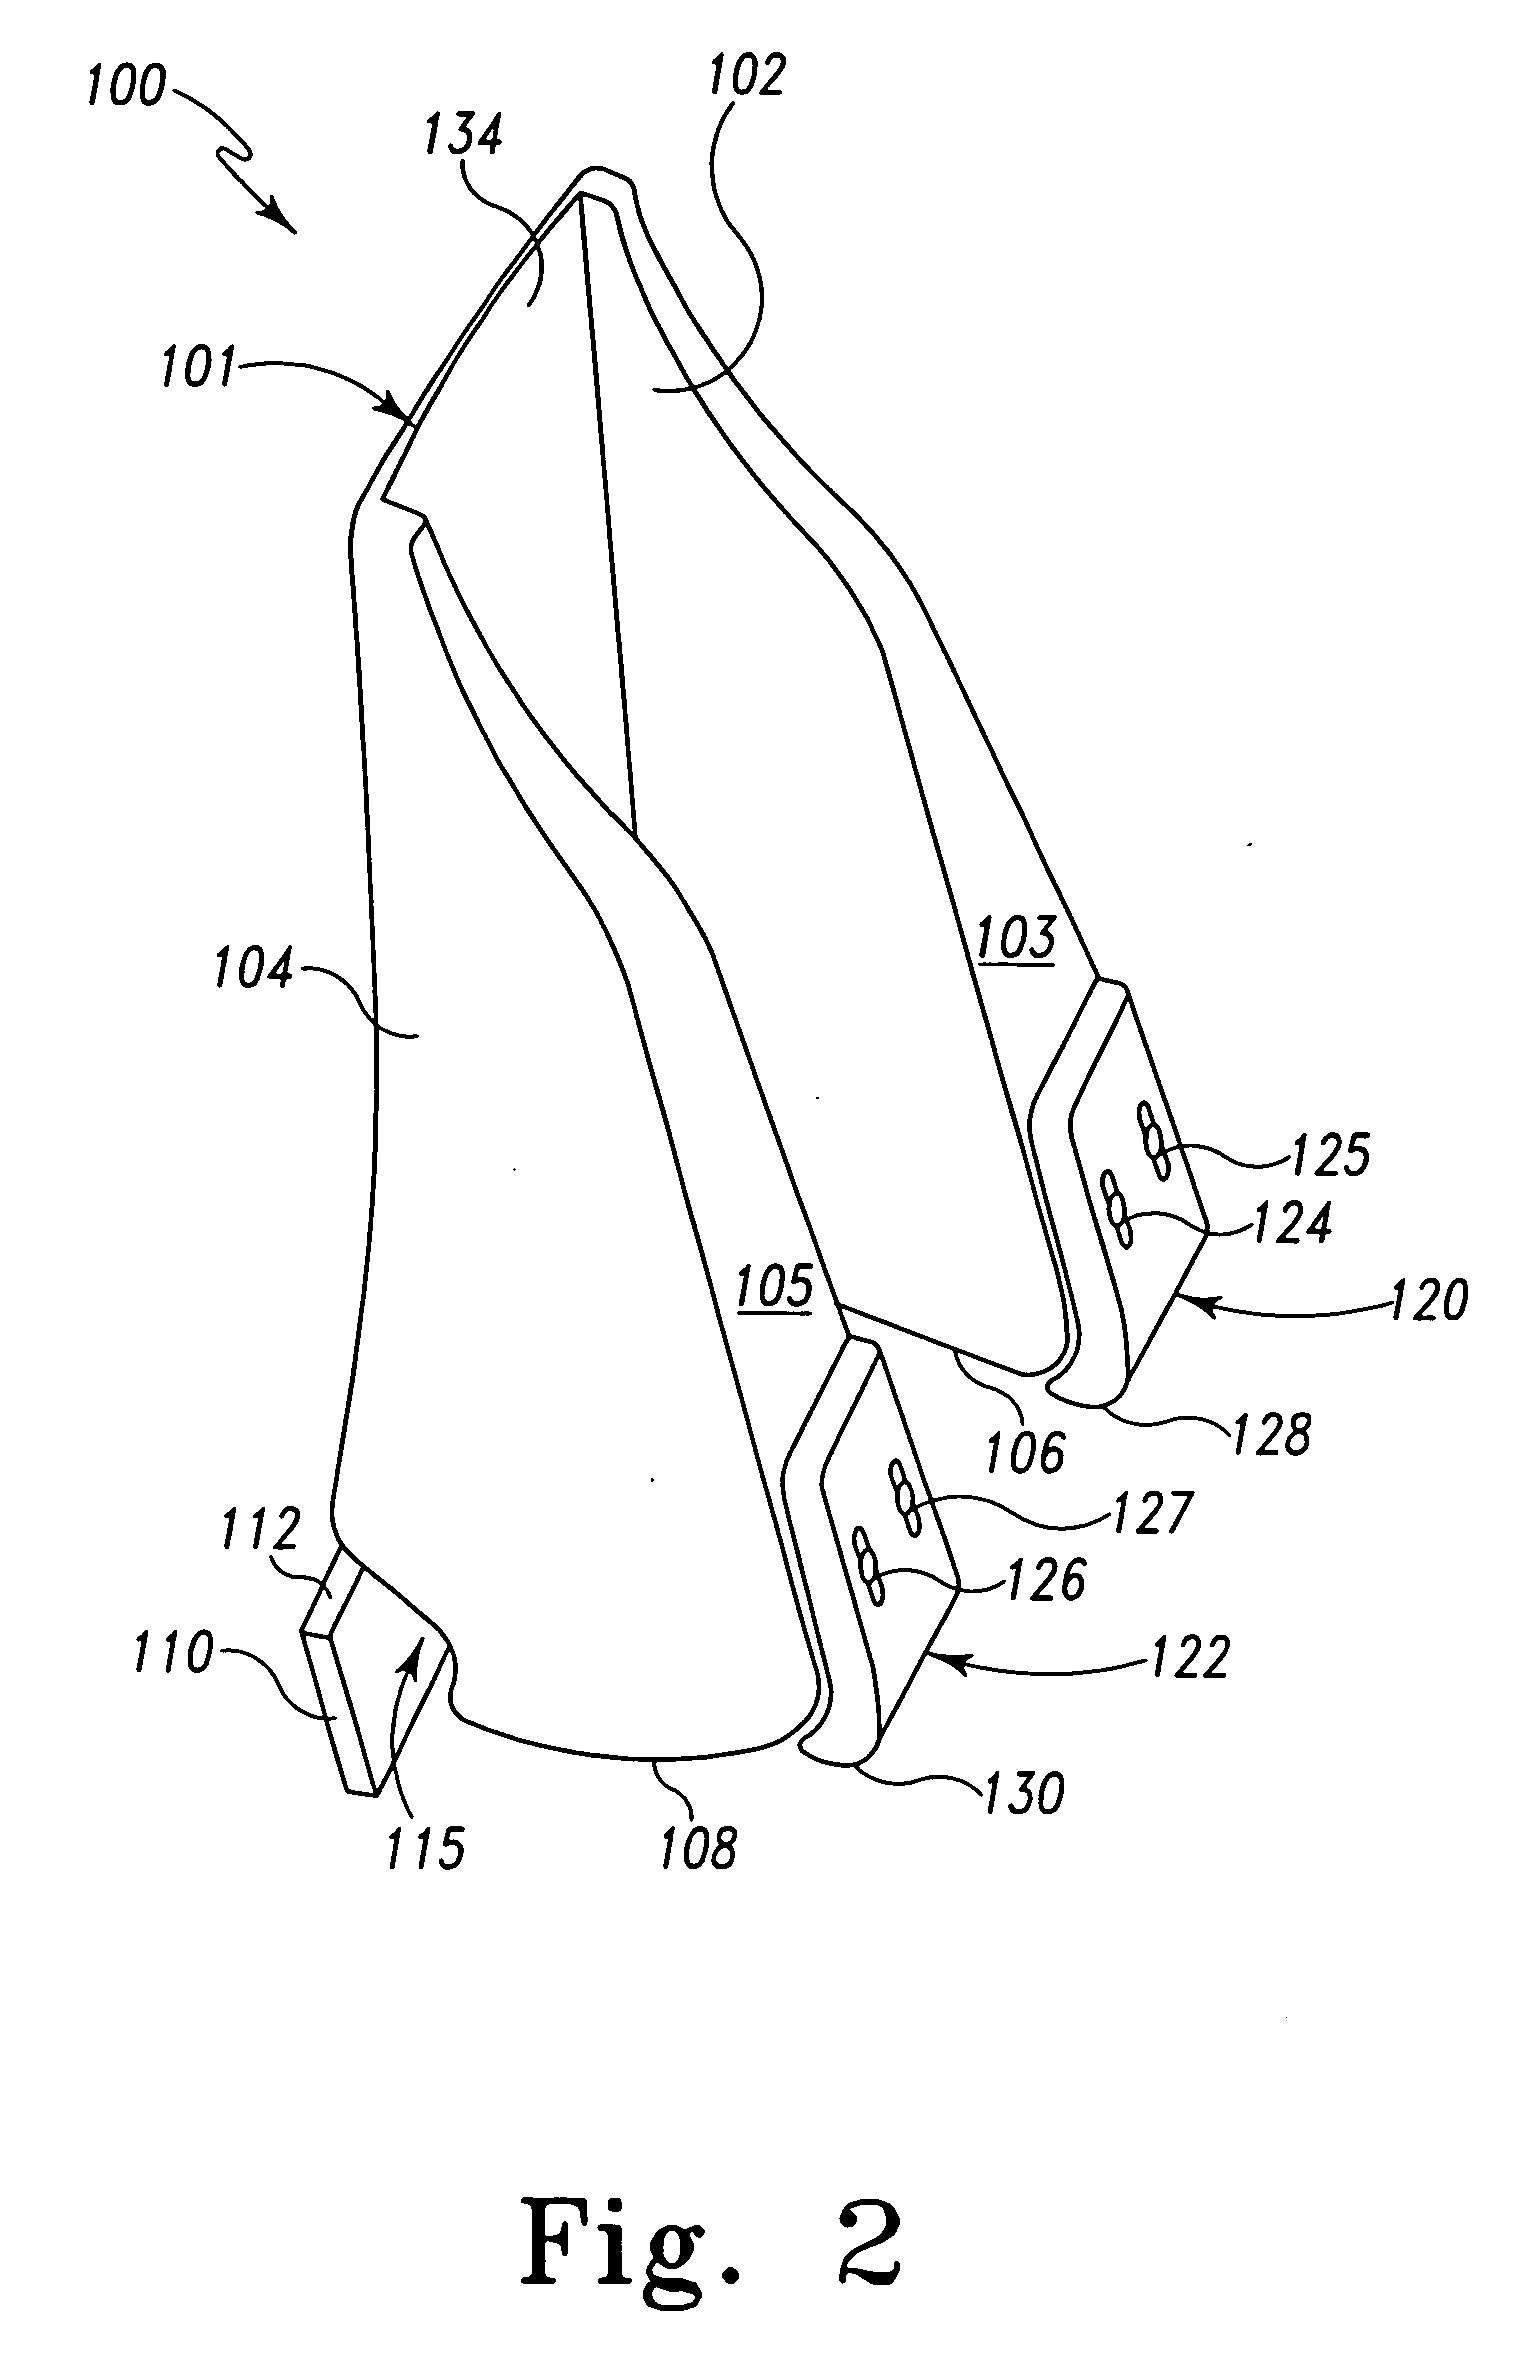 Head and neck restraint system and device